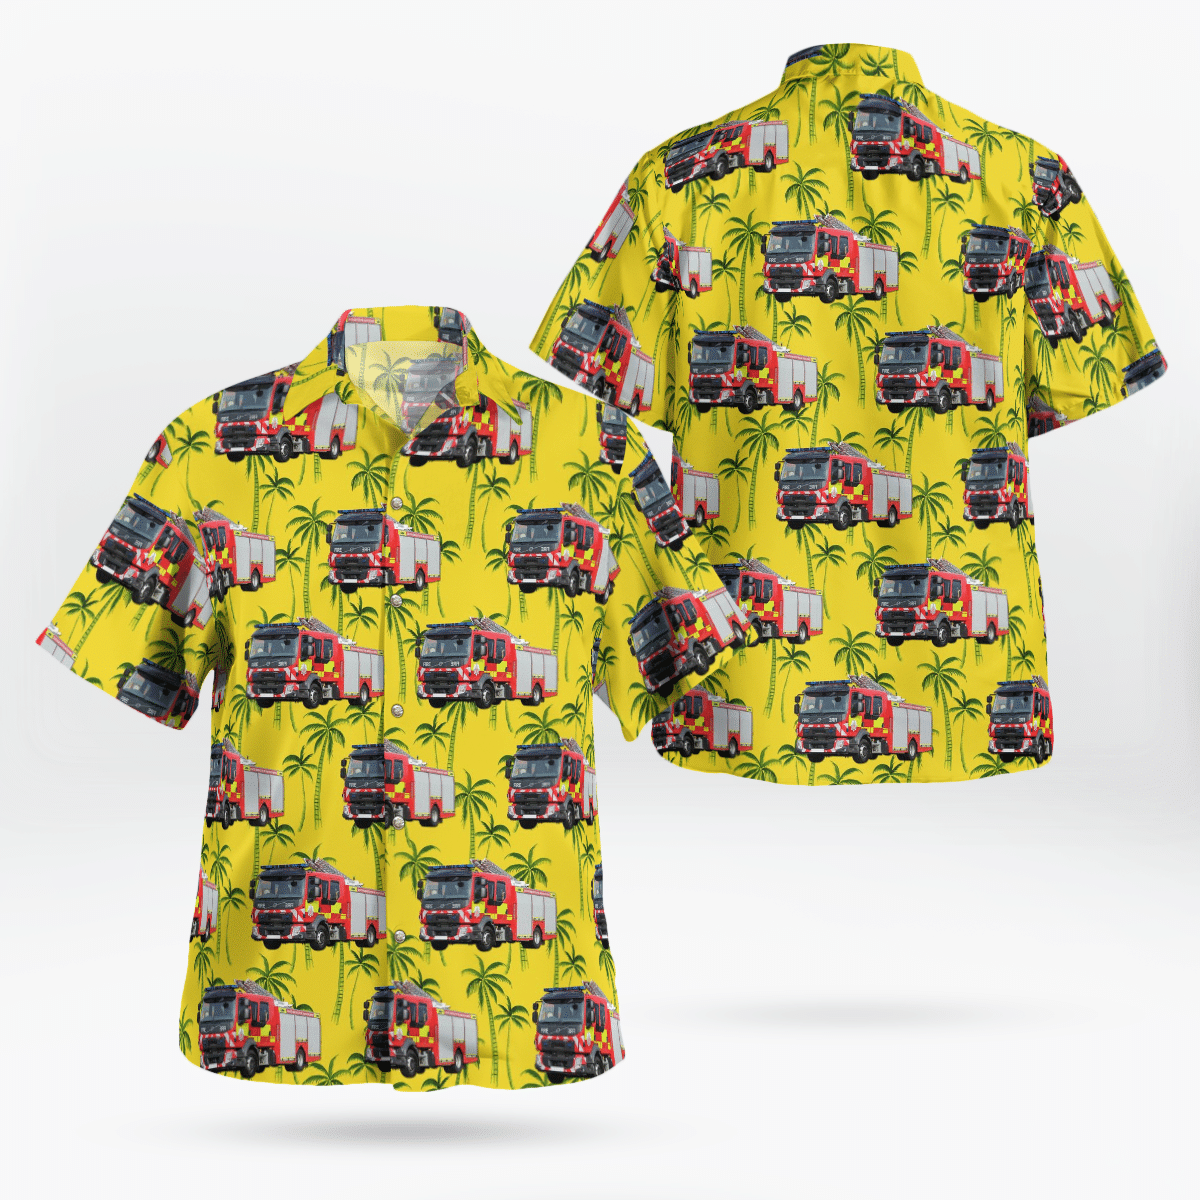 If you are in need of a new summertime look, pick up this Hawaiian shirt 166